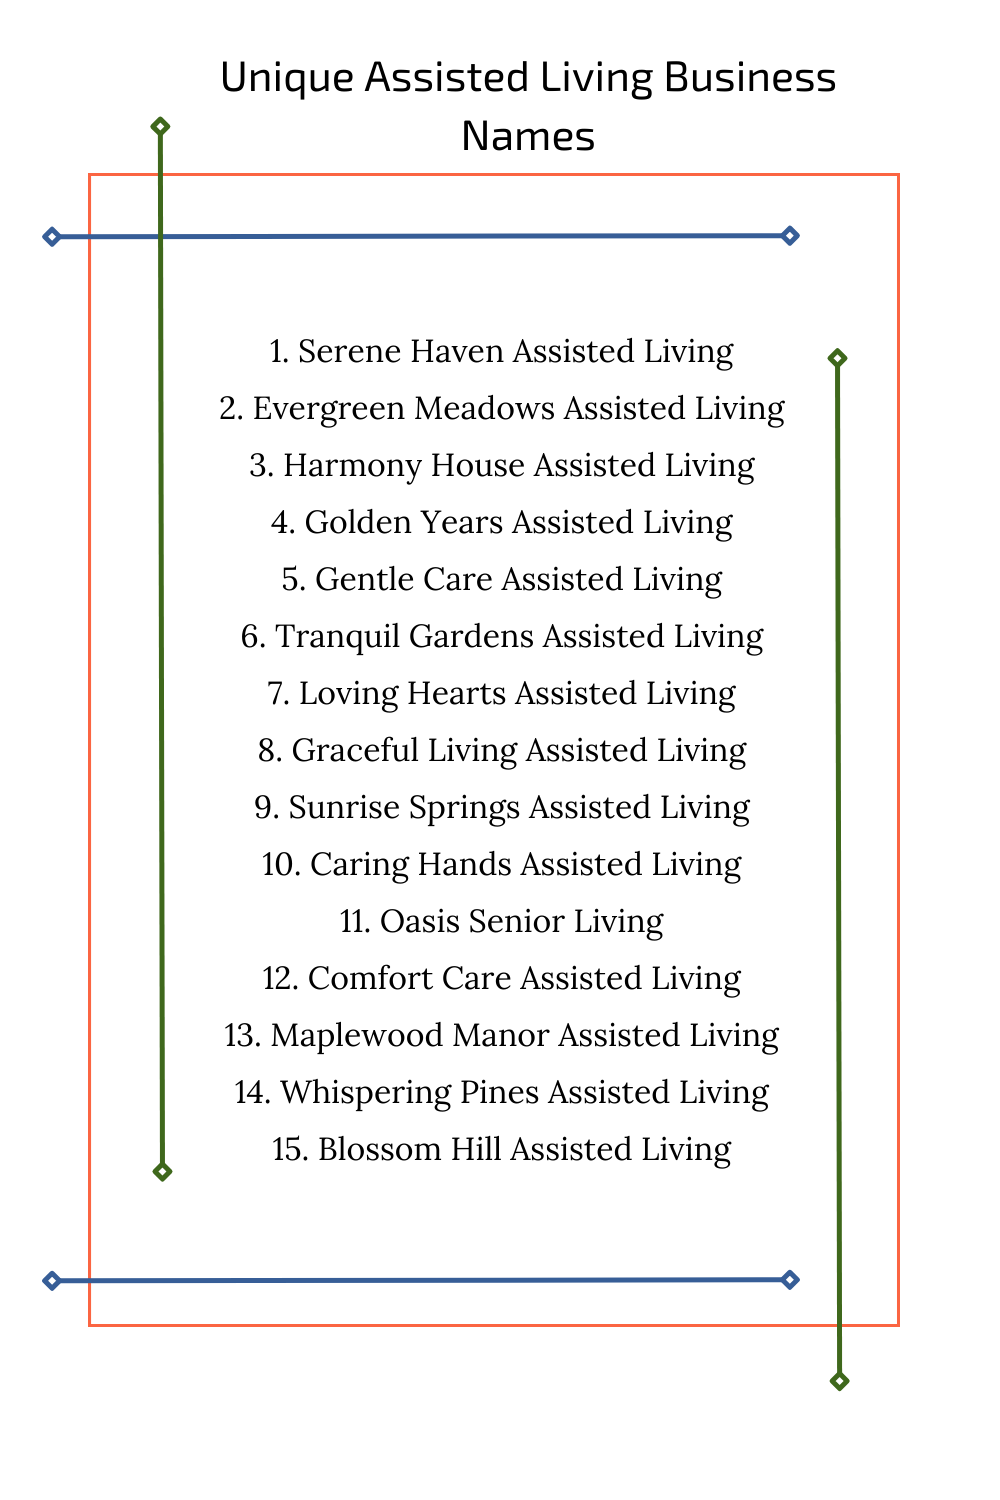 Unique Assisted Living Business Names